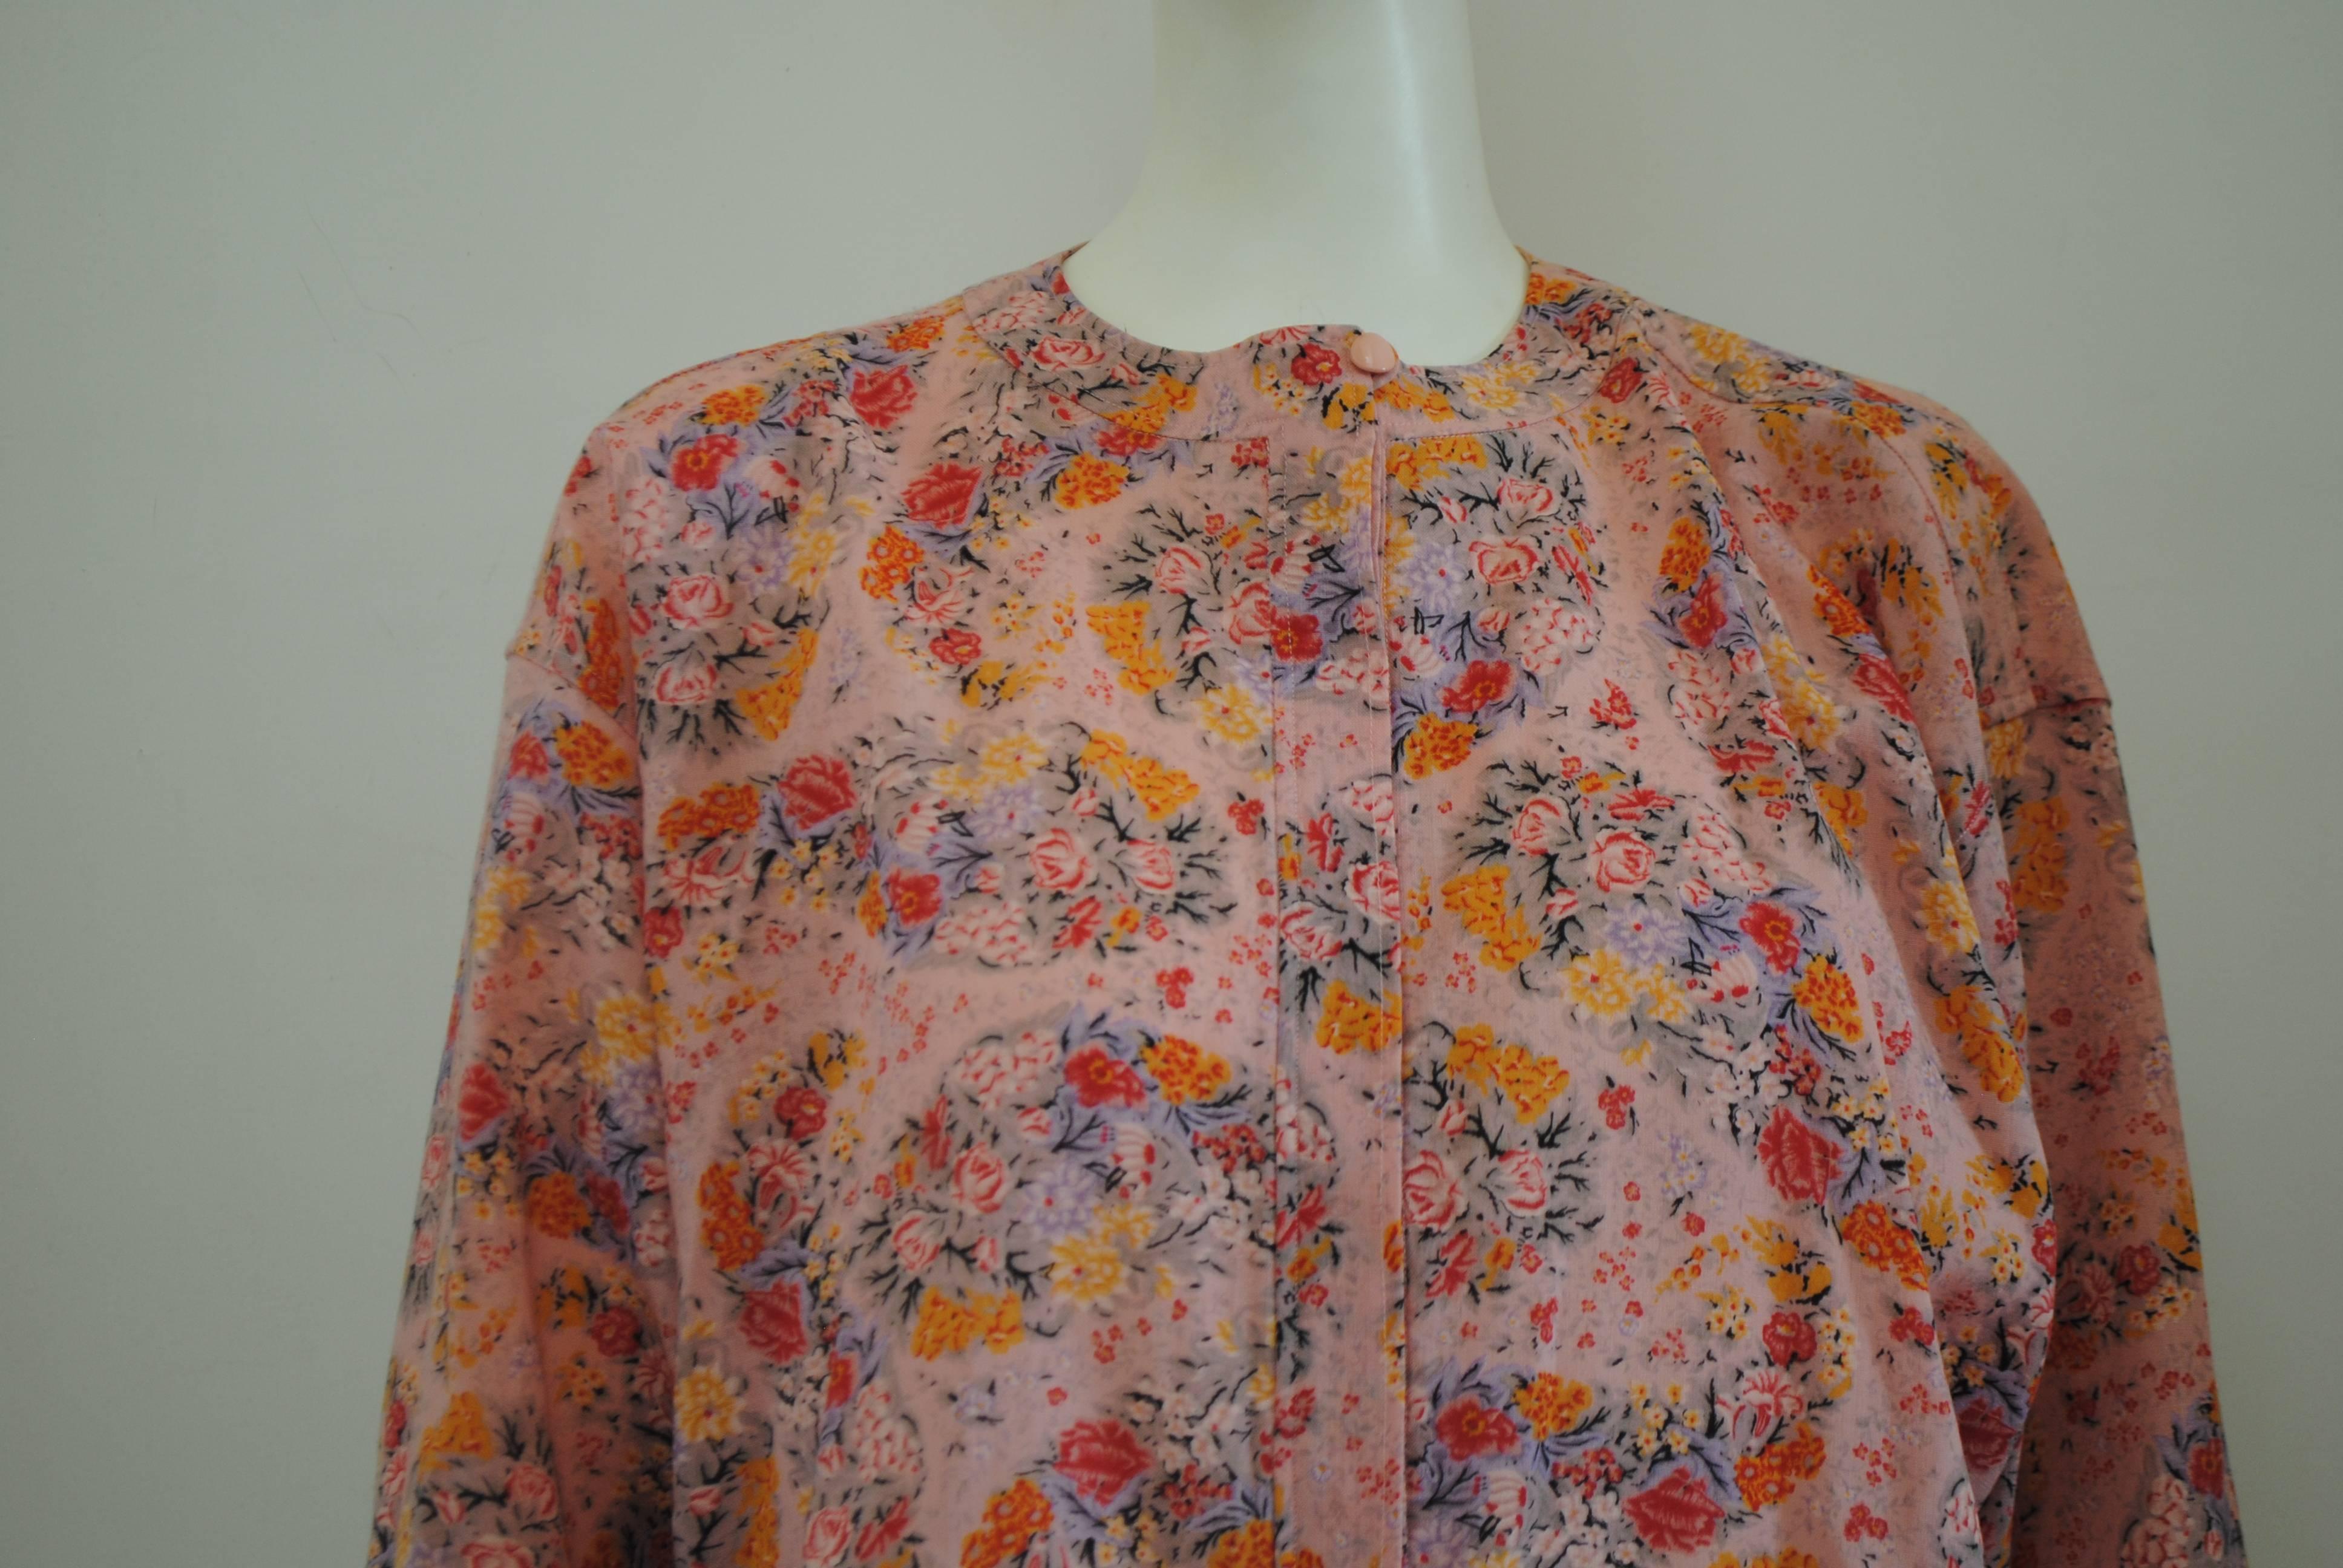 Ungaro Solo Donna Paris Wool Flower Shirt In Good Condition For Sale In Capri, IT